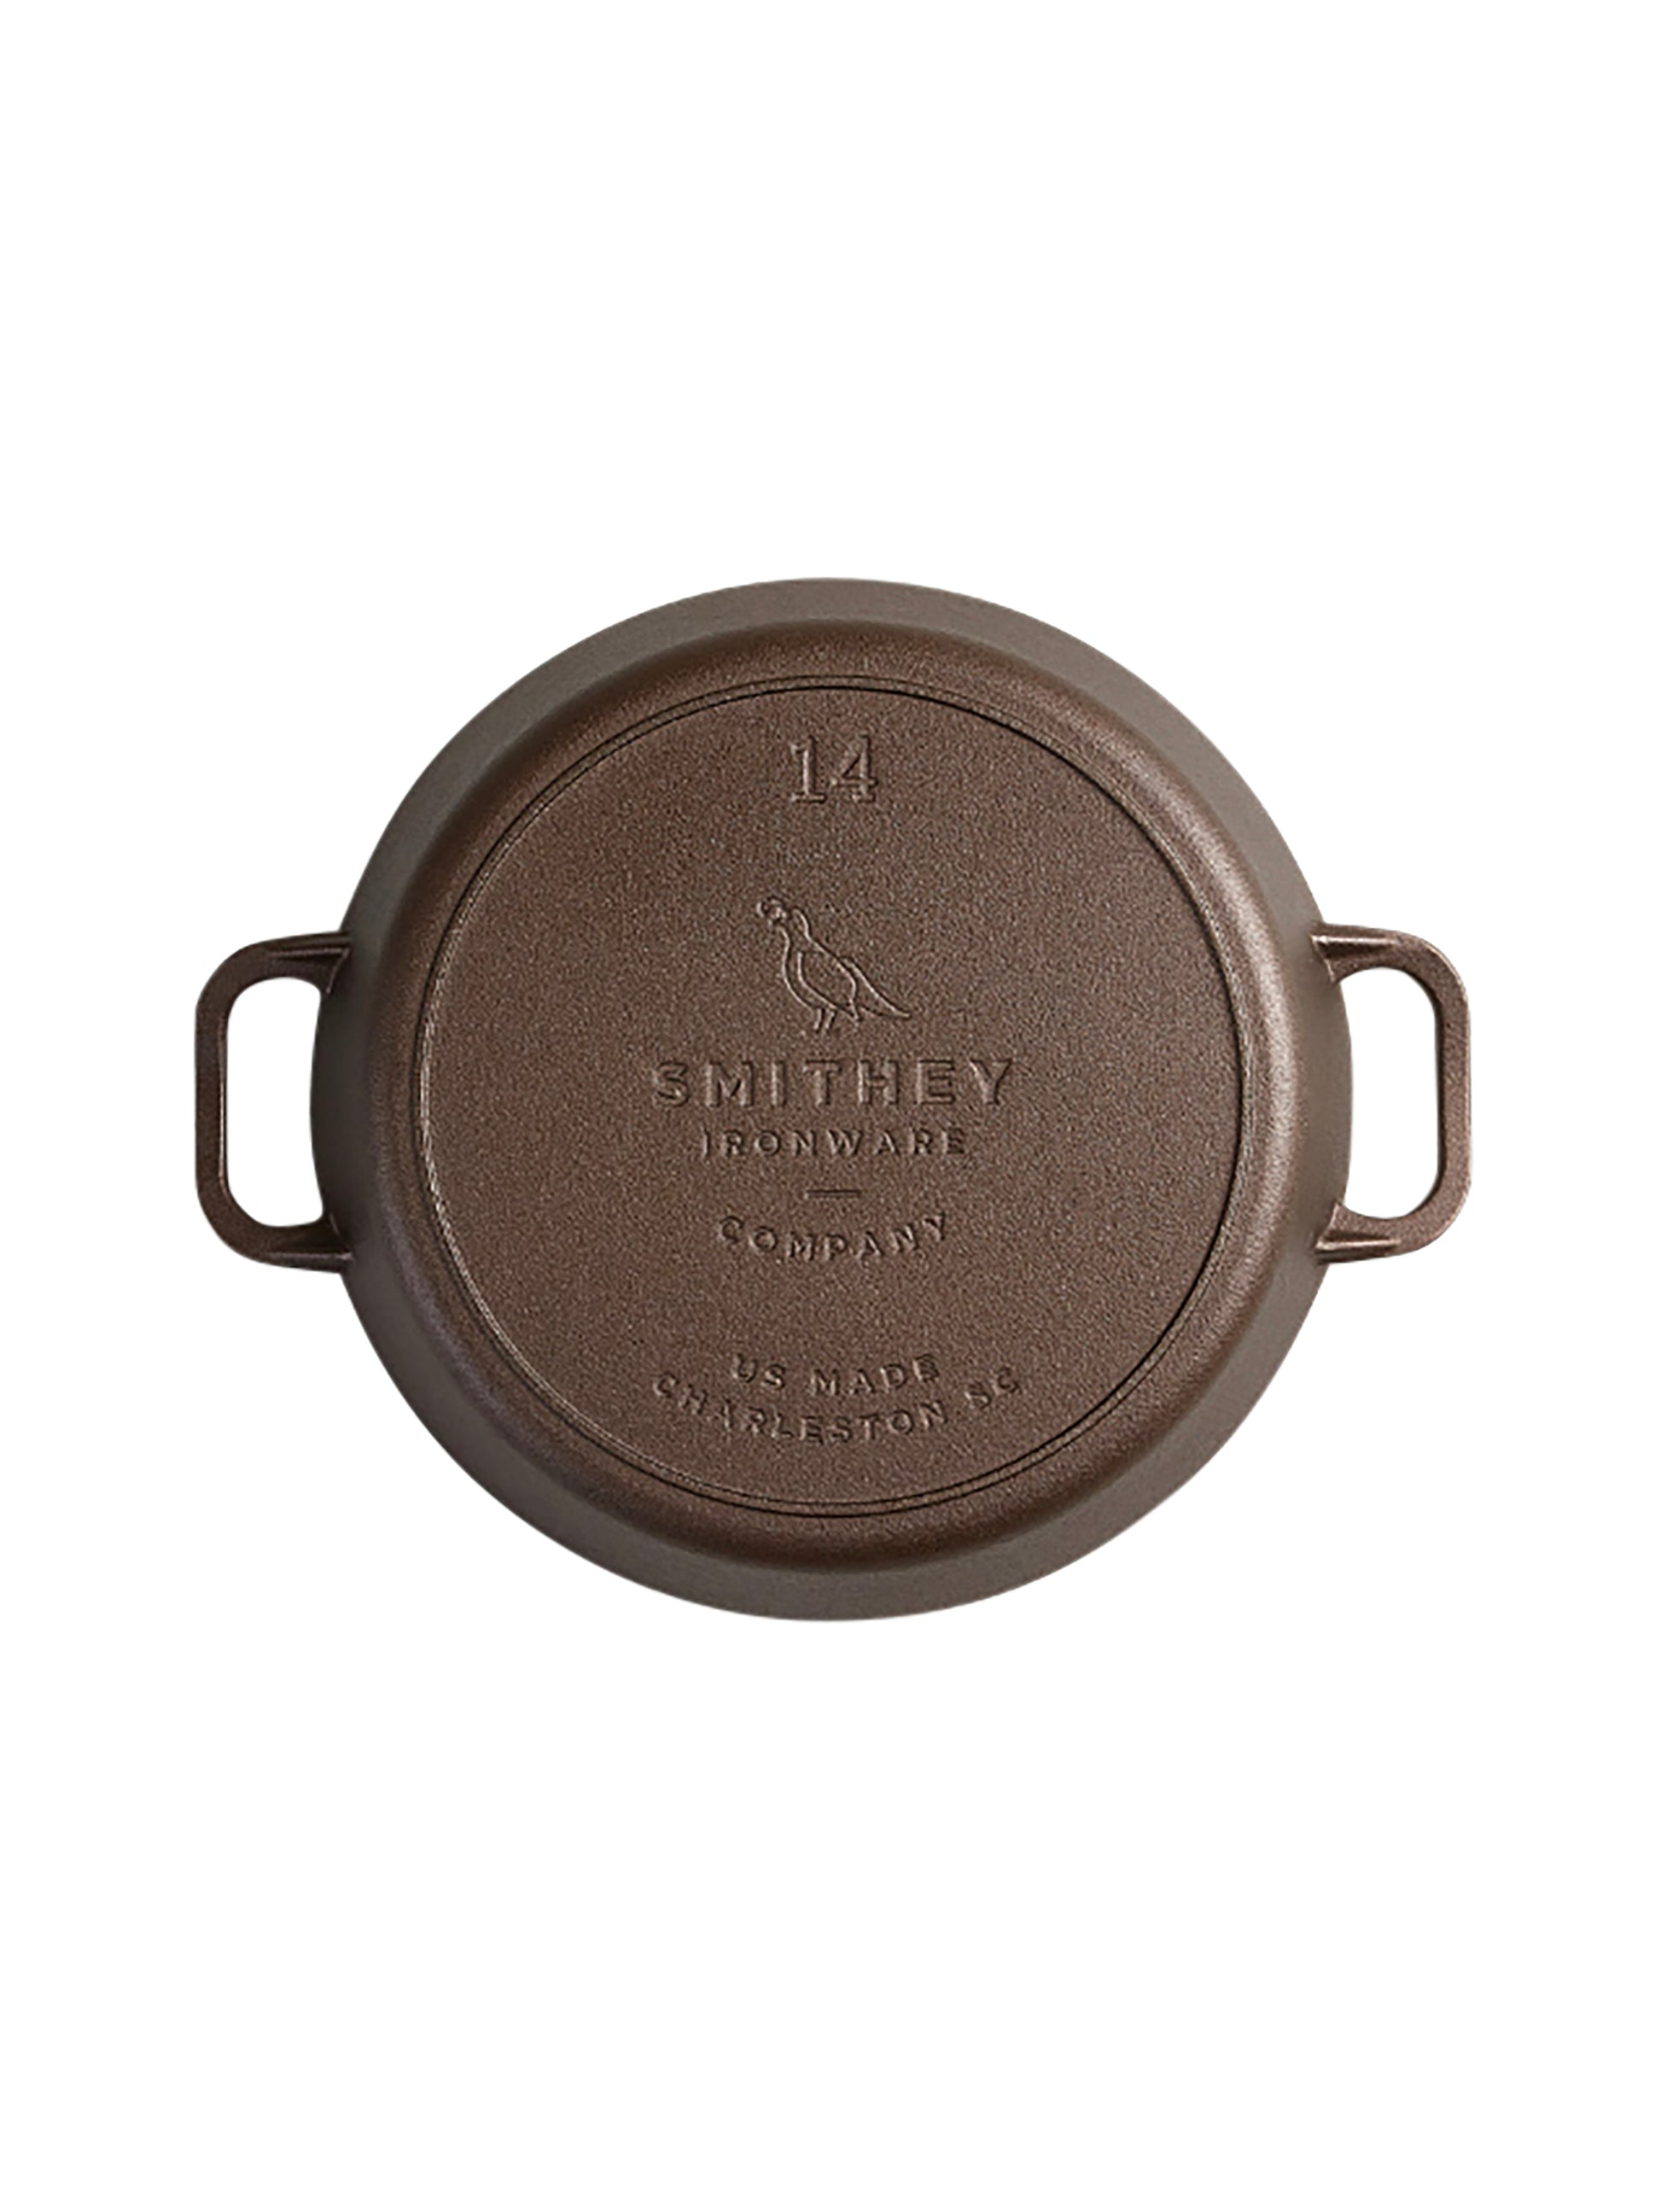 Nest Homeware Cast Iron Braising Pan with Lid in 2023